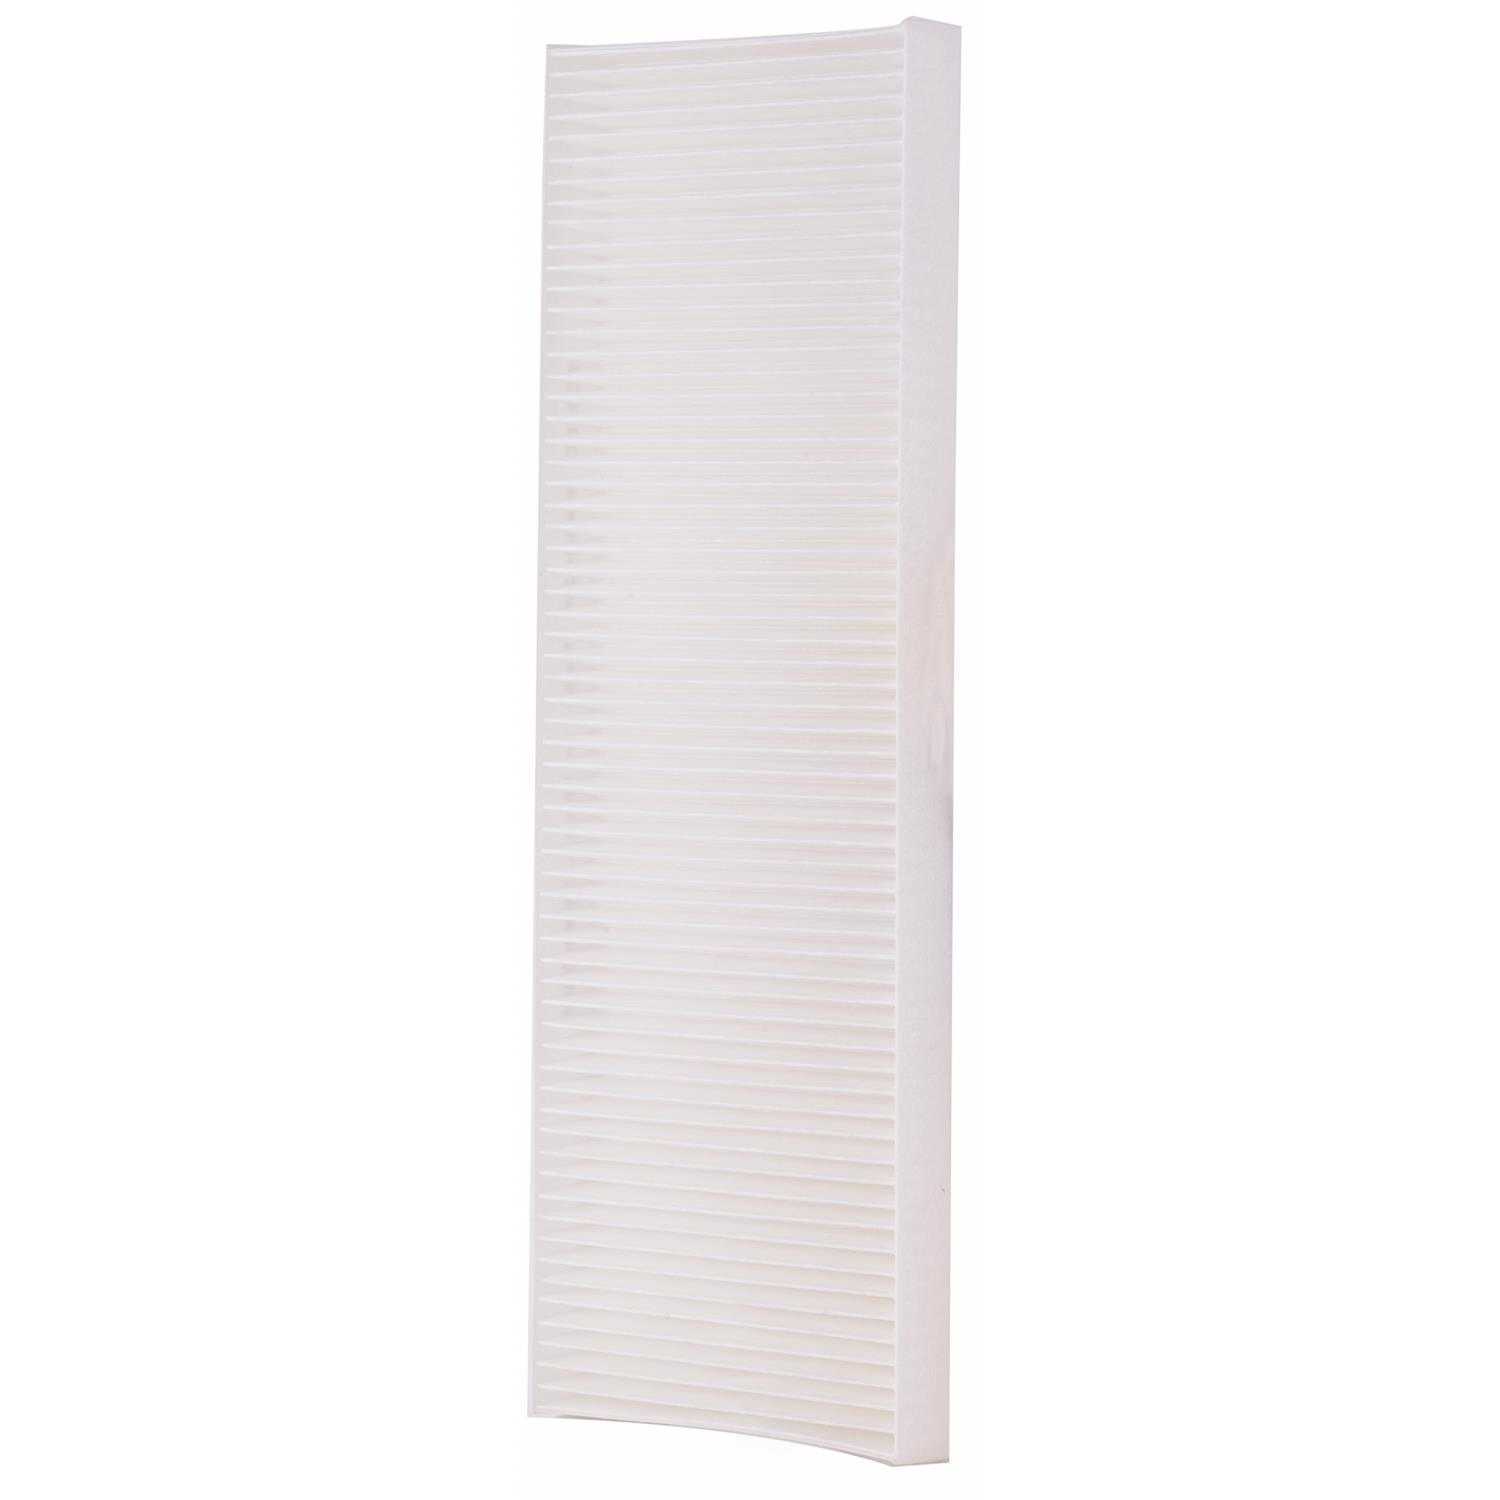 PRONTO/ID USA - Cabin Air Filter - PNP PC5480